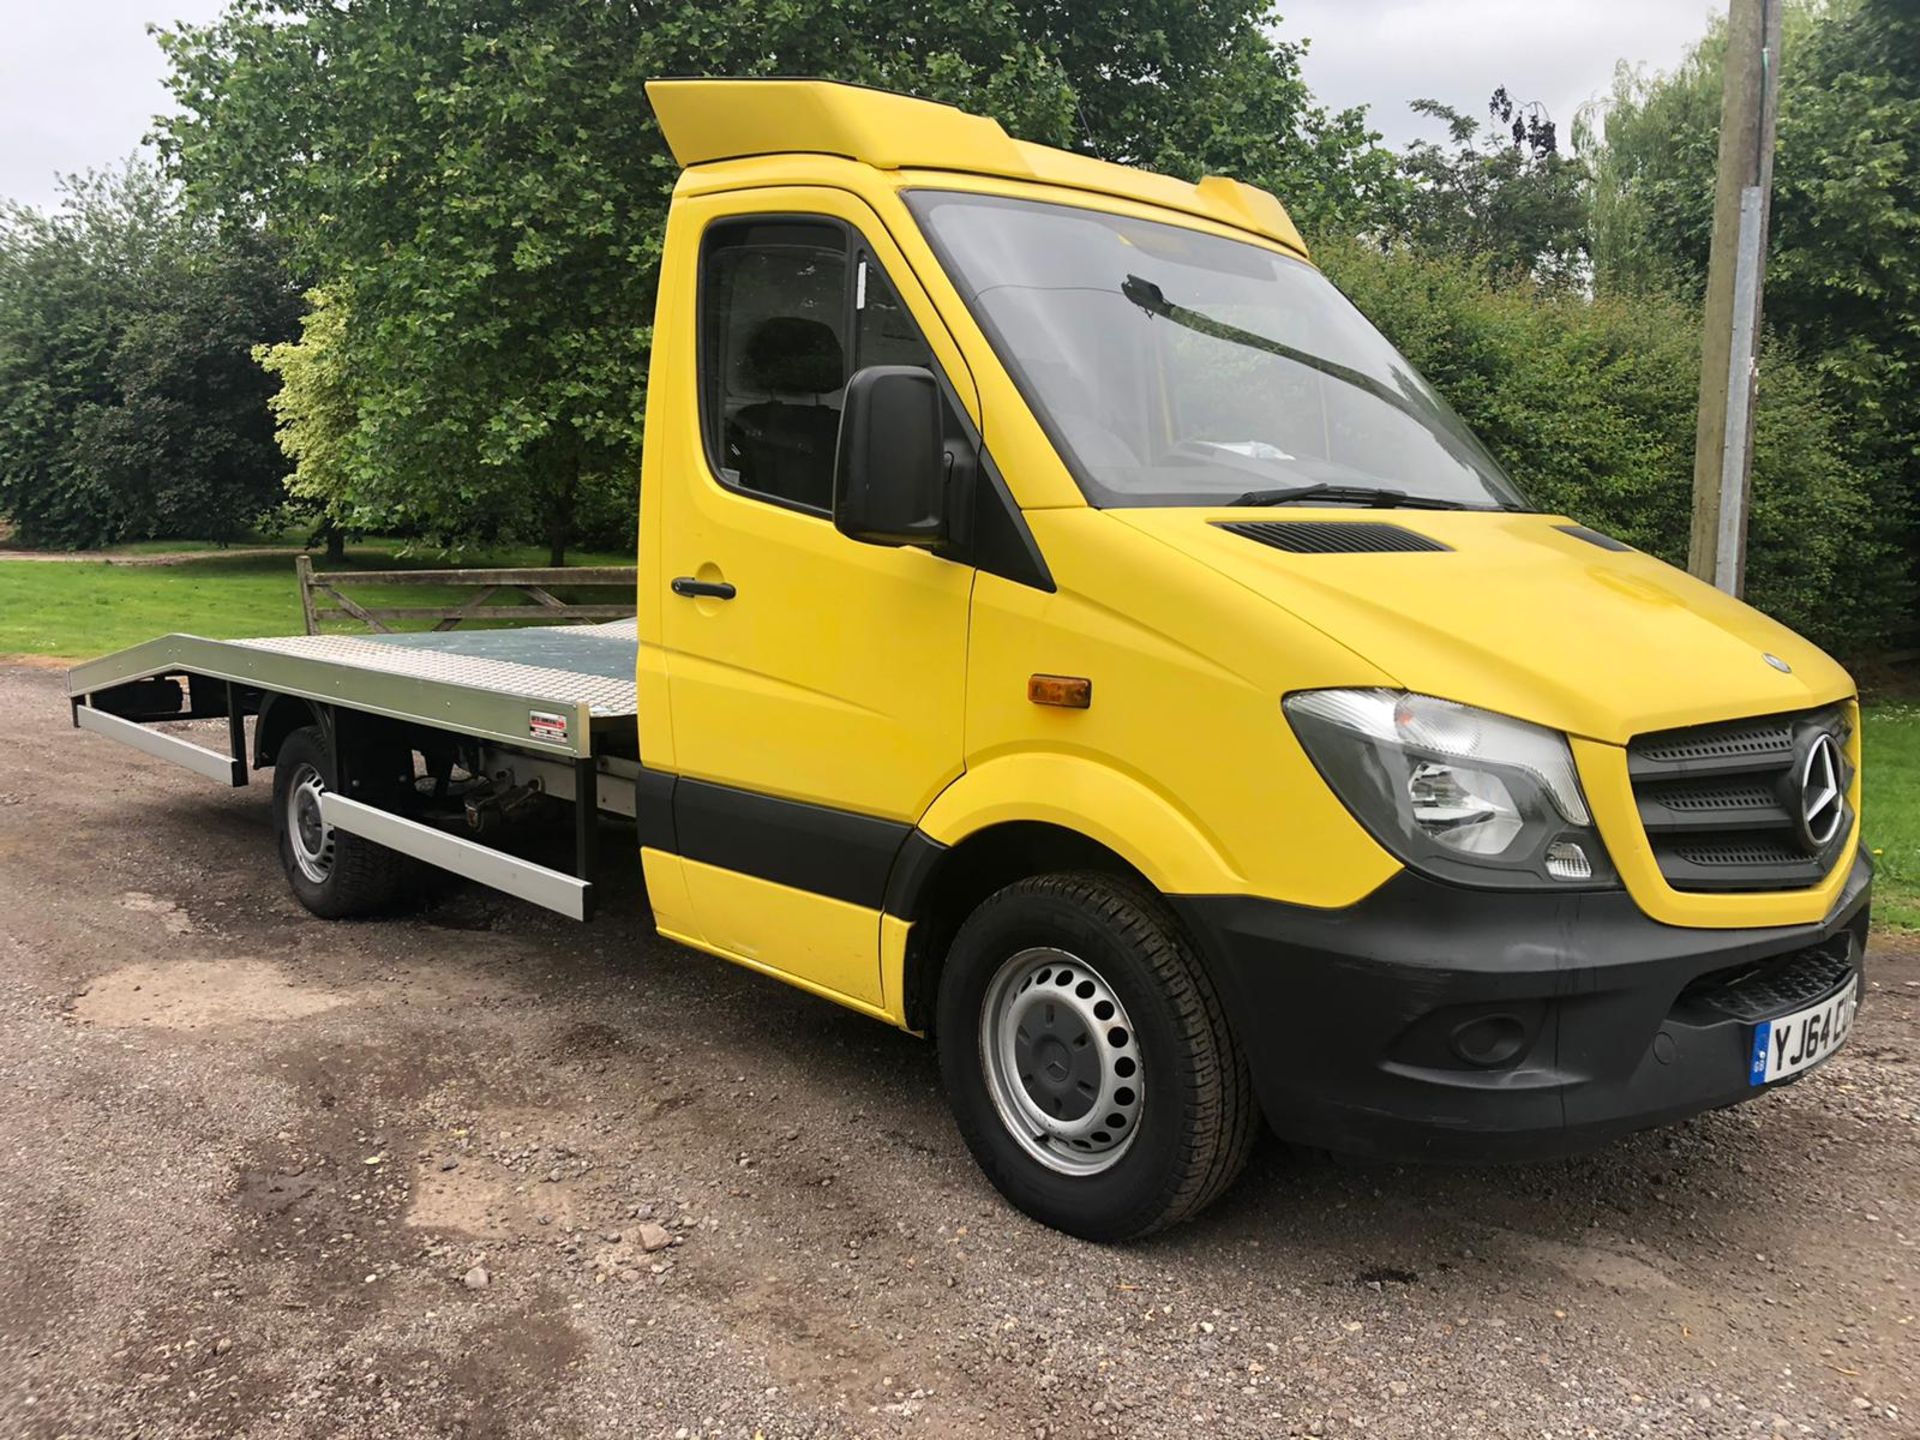 2014 MERCEDES-BENZ SPRINTER 313 CDI WITH BRAND NEW RECOVERY BODY, WIRELESS WINCH *PLUS VAT*